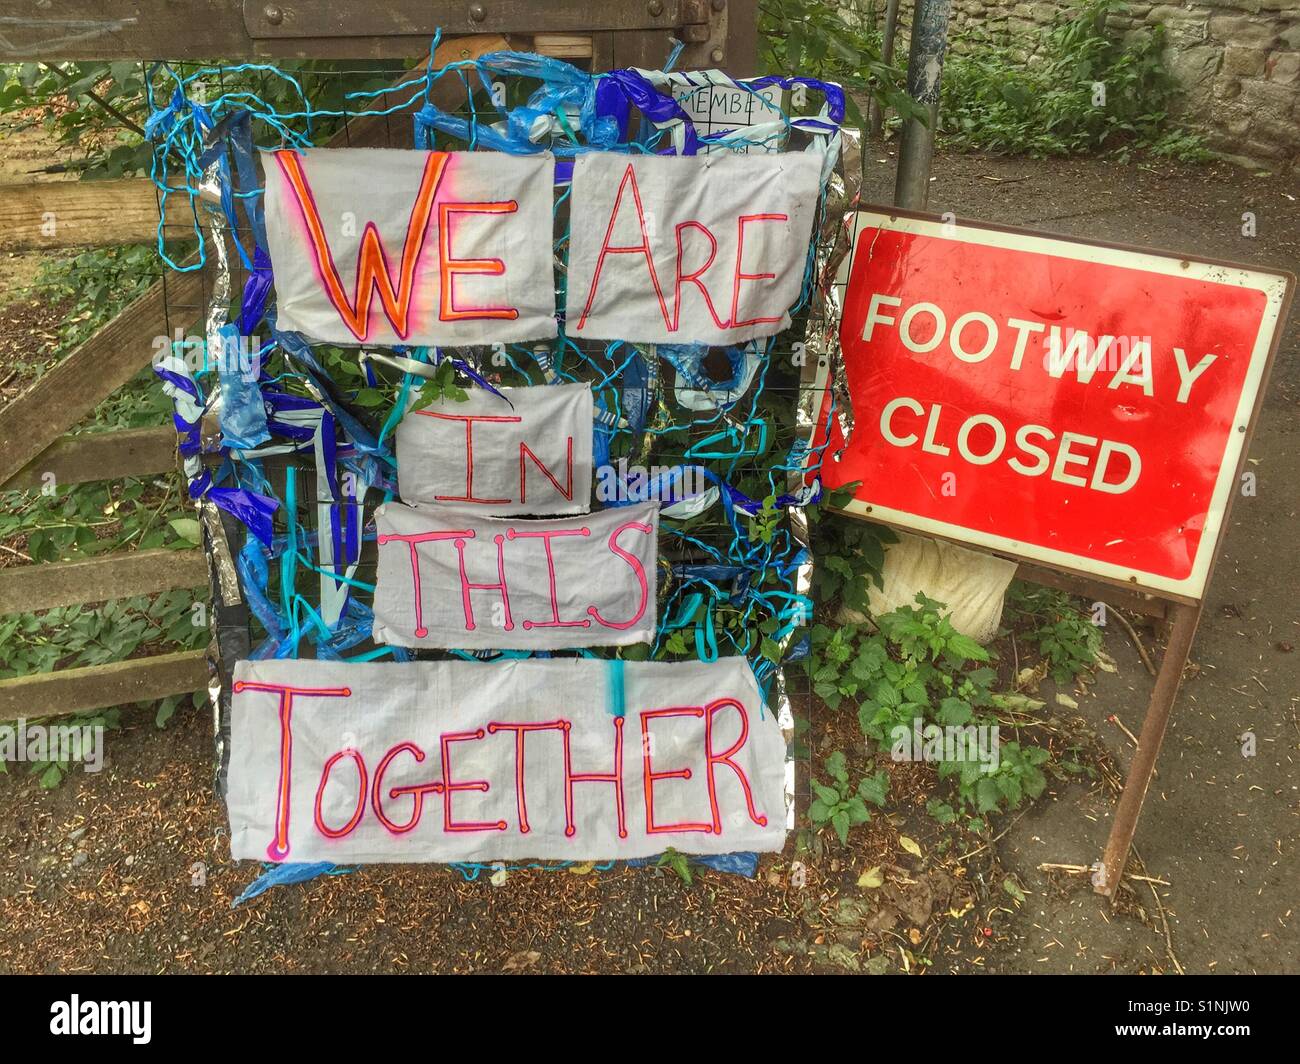 We are in this together and footway closed signs in Bristol, England Stock Photo